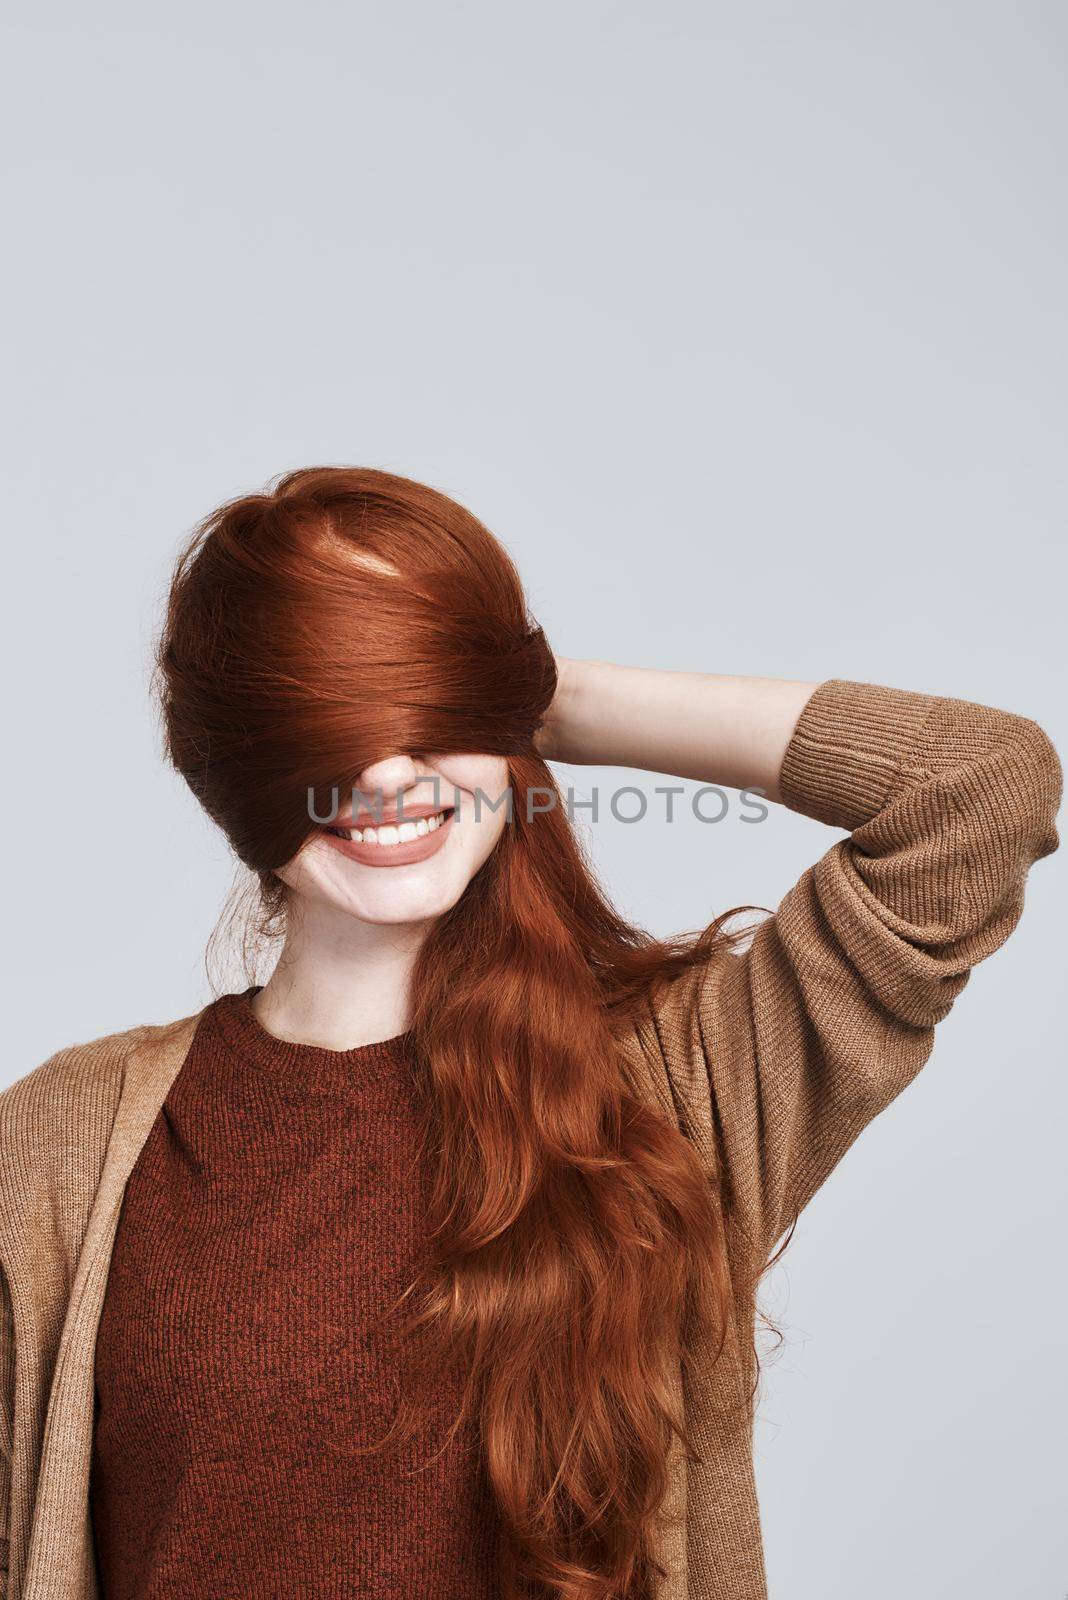 Natural beauty. Portrait of cheerful and young redhead woman playing with her hair and smiling while standing against grey background by friendsstock